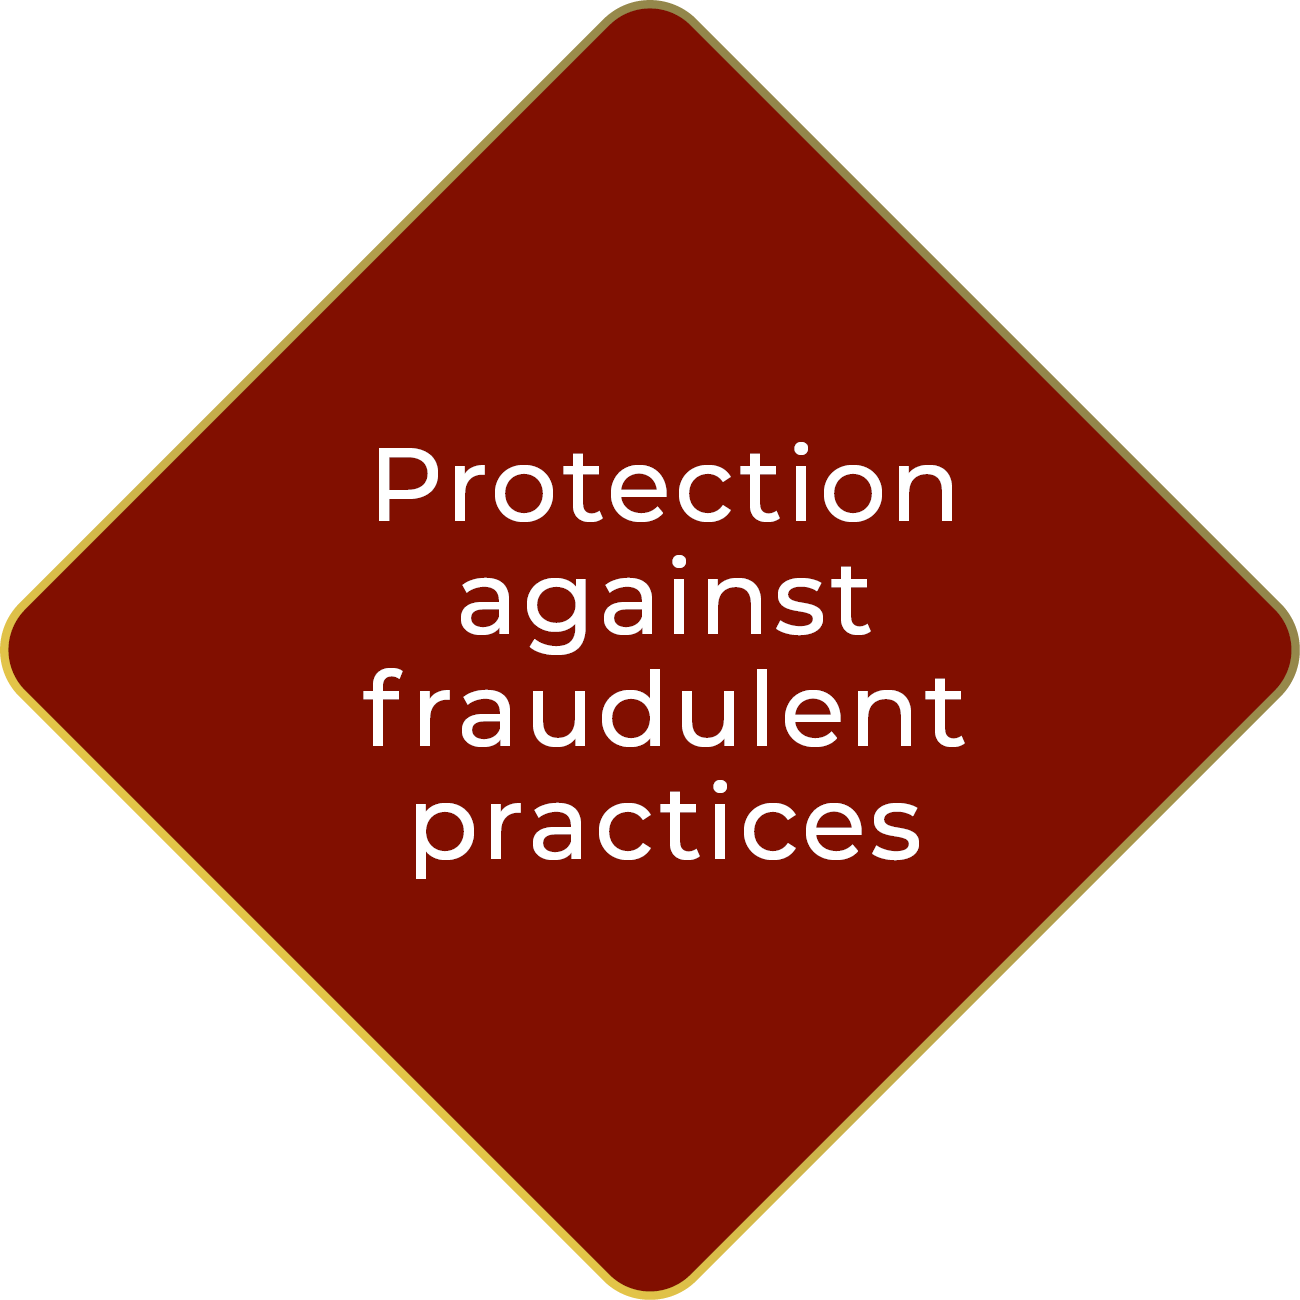 Protection against fraudulent practices